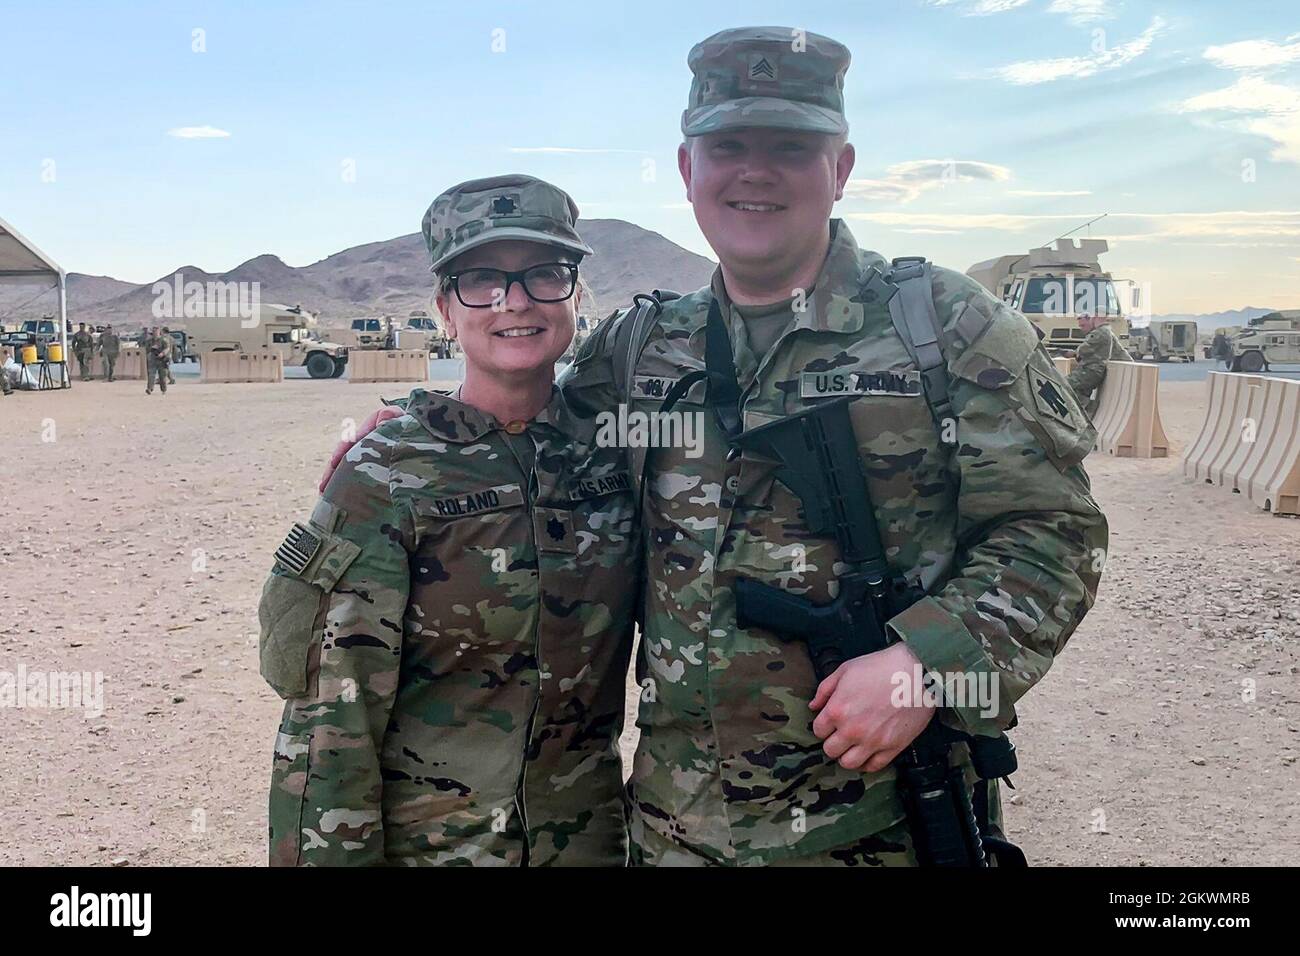 Lt. Col. Tanya Roland and her son, Sgt. Paul Roland, serve together in the 45th IBCT during a rotation at the National Training Center in Fort Irwin, CA, July 11, 2021. Tanya Roland, the 45th IBCT judge advocate, transferred to the Oklahoma Army National Guard in November 2020 after nearly 18 years of service with the United States Army Reserve. Paul Roland, religious affairs specialist for Headquarters Battery, 1st Battalion, 160th Field Artillery Regiment, has been in the Oklahoma Army National Guard for seven years. Stock Photo